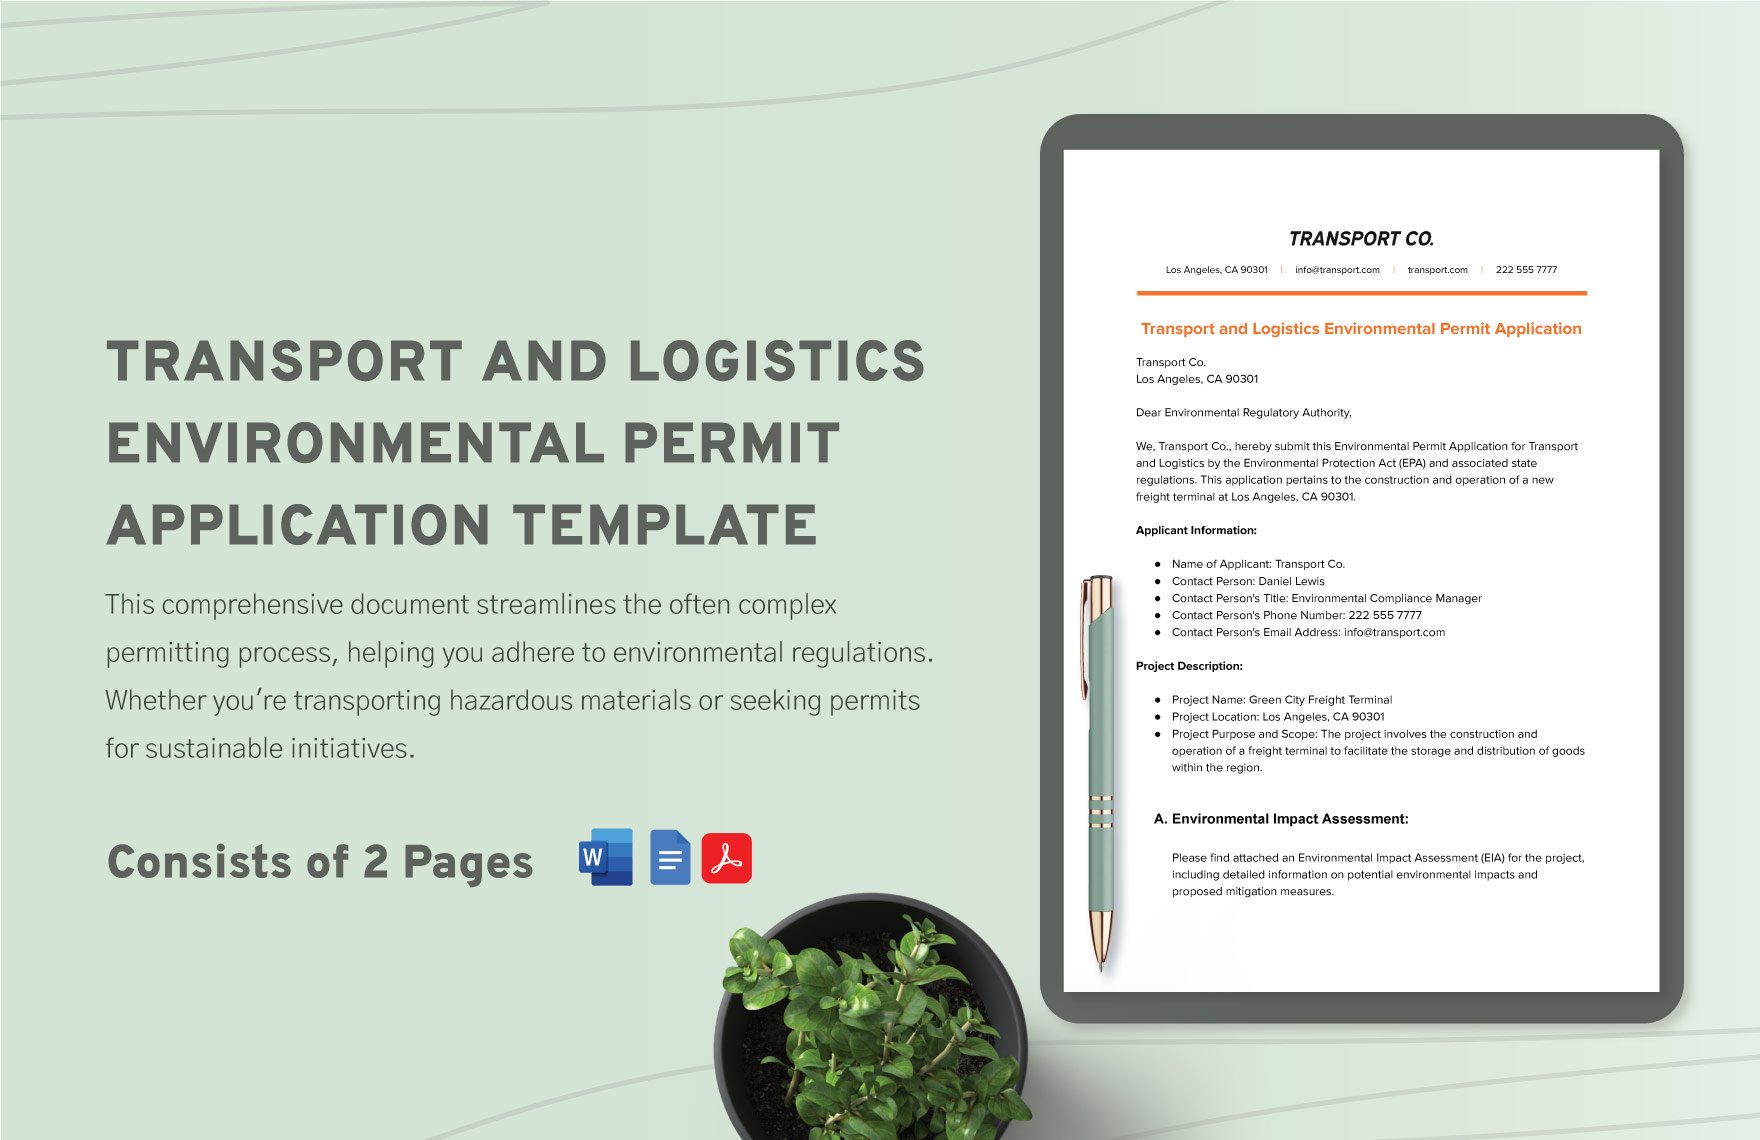 Transport and Logistics Environmental Permit Application Template in Word, Google Docs, PDF